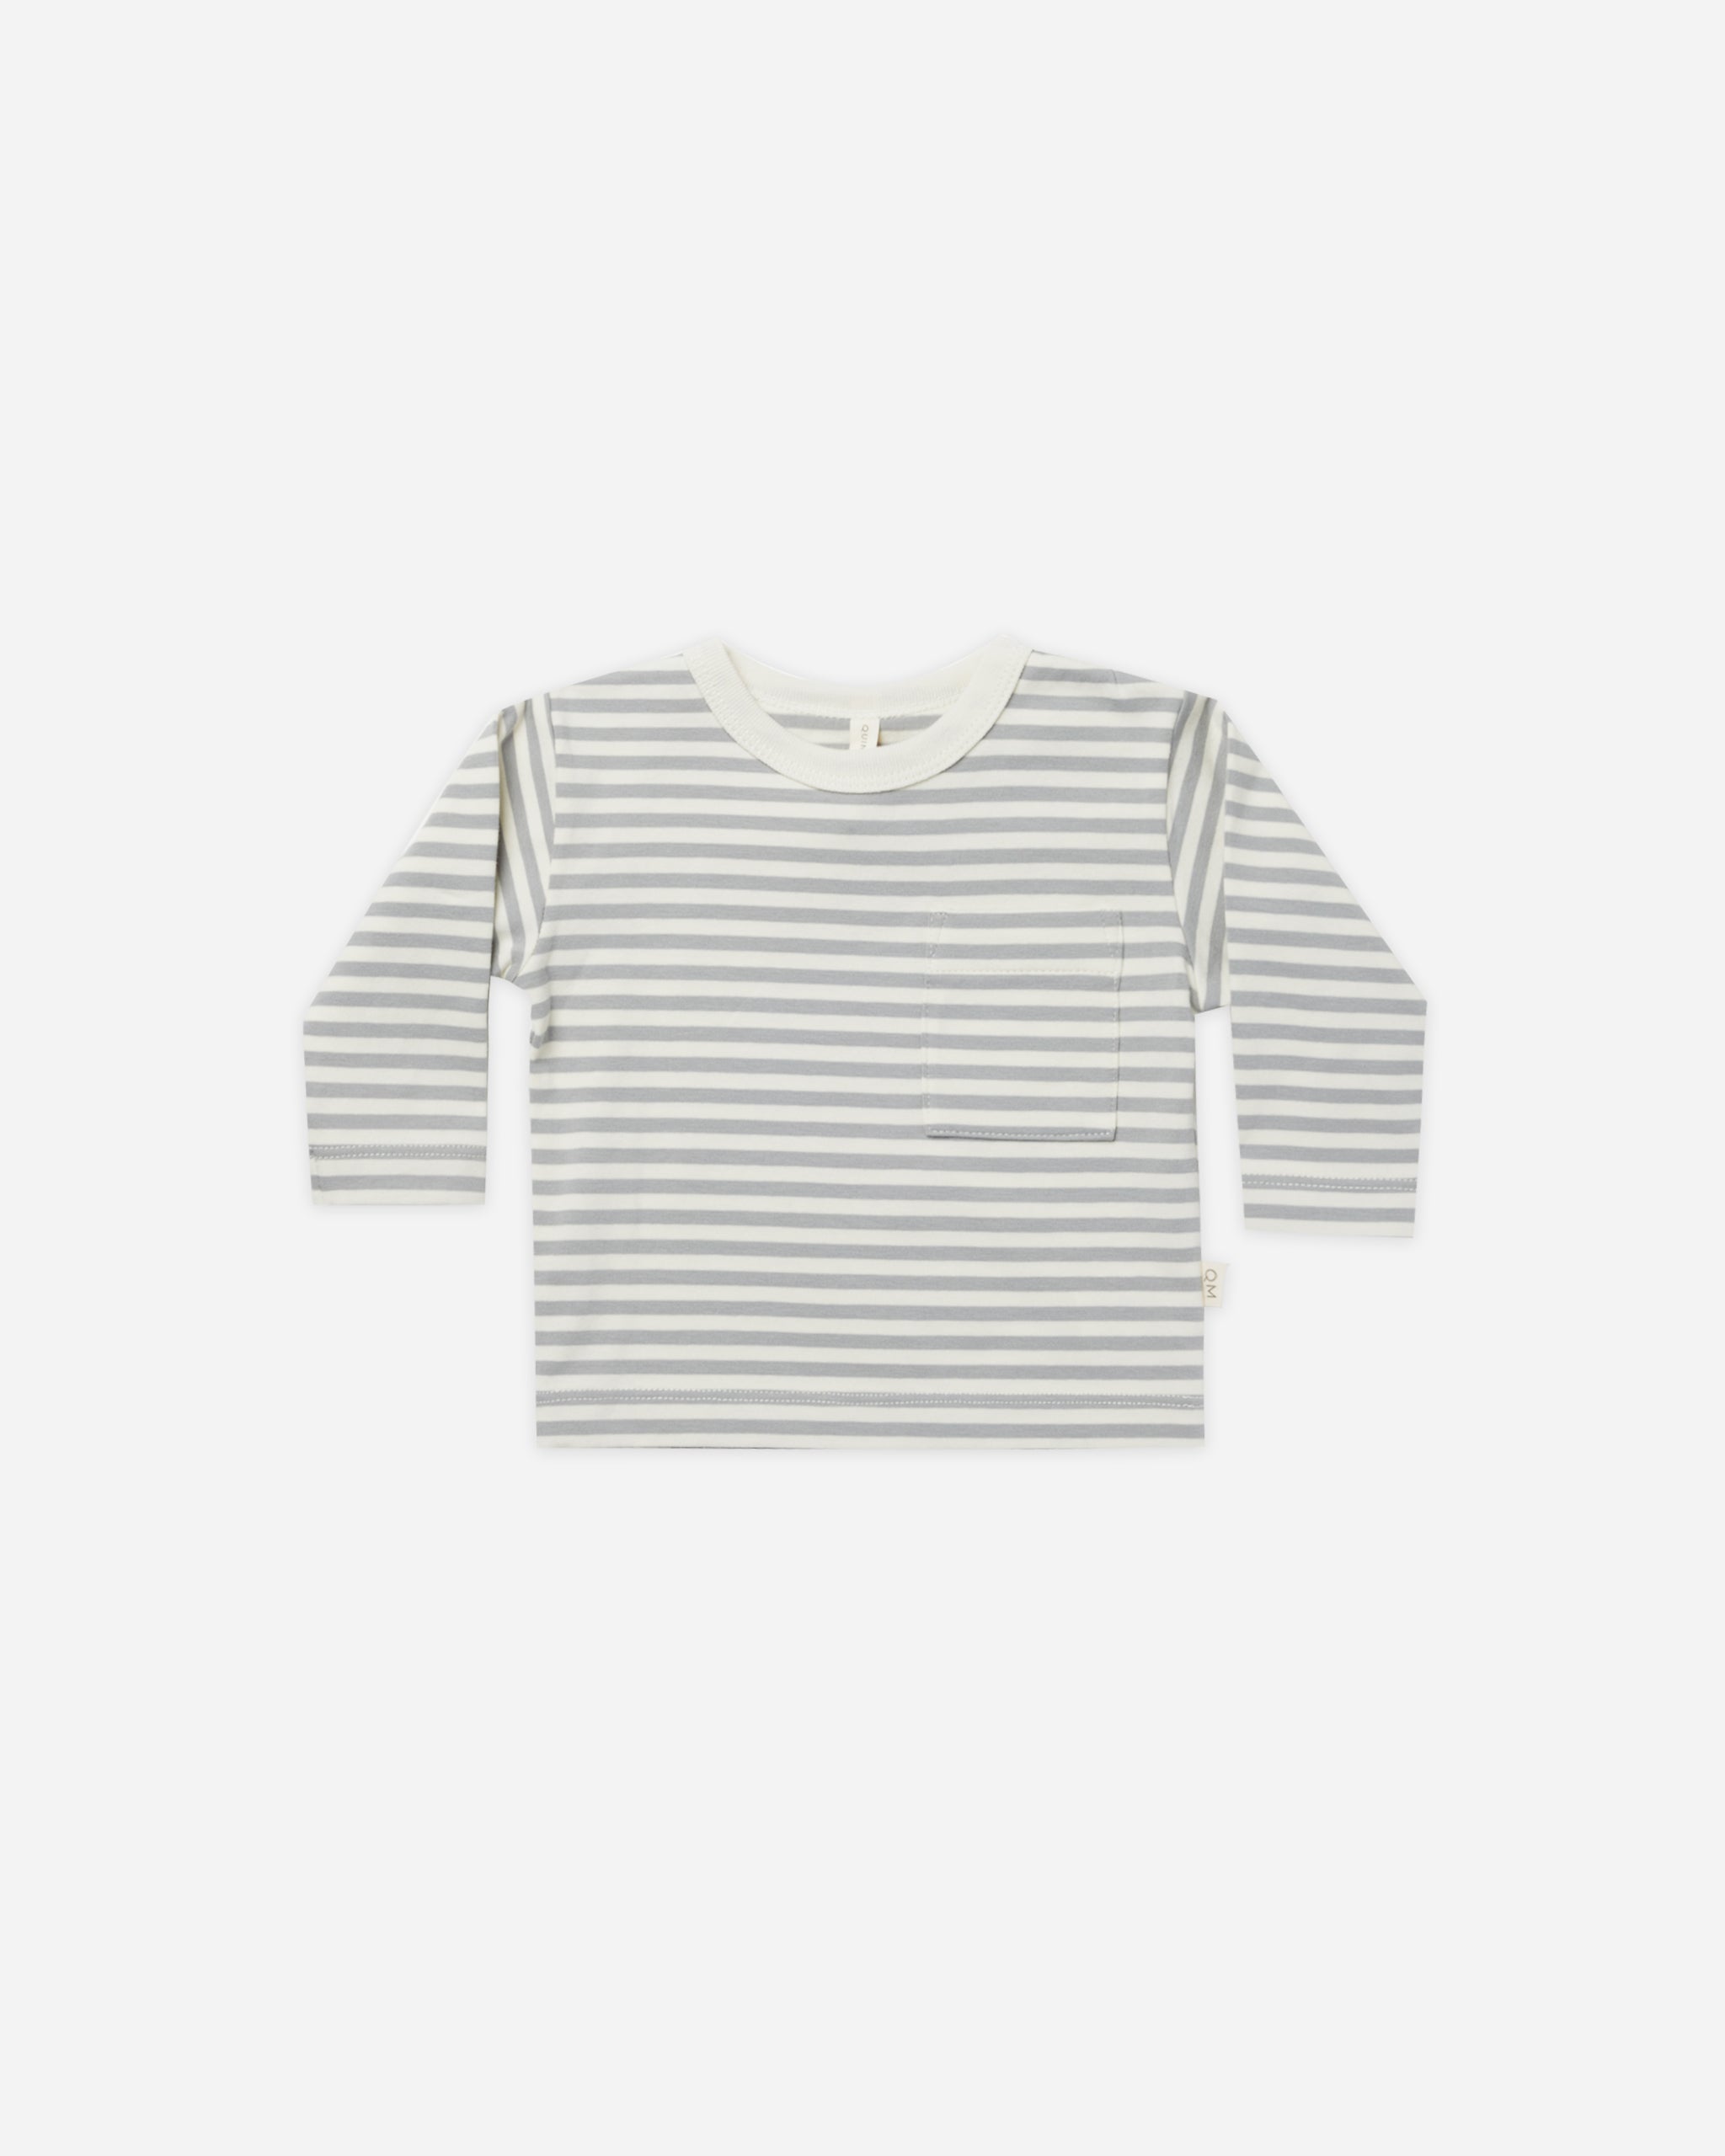 Long Sleeve Pocket Tee || Dusty Blue Stripe - Rylee + Cru | Kids Clothes | Trendy Baby Clothes | Modern Infant Outfits |